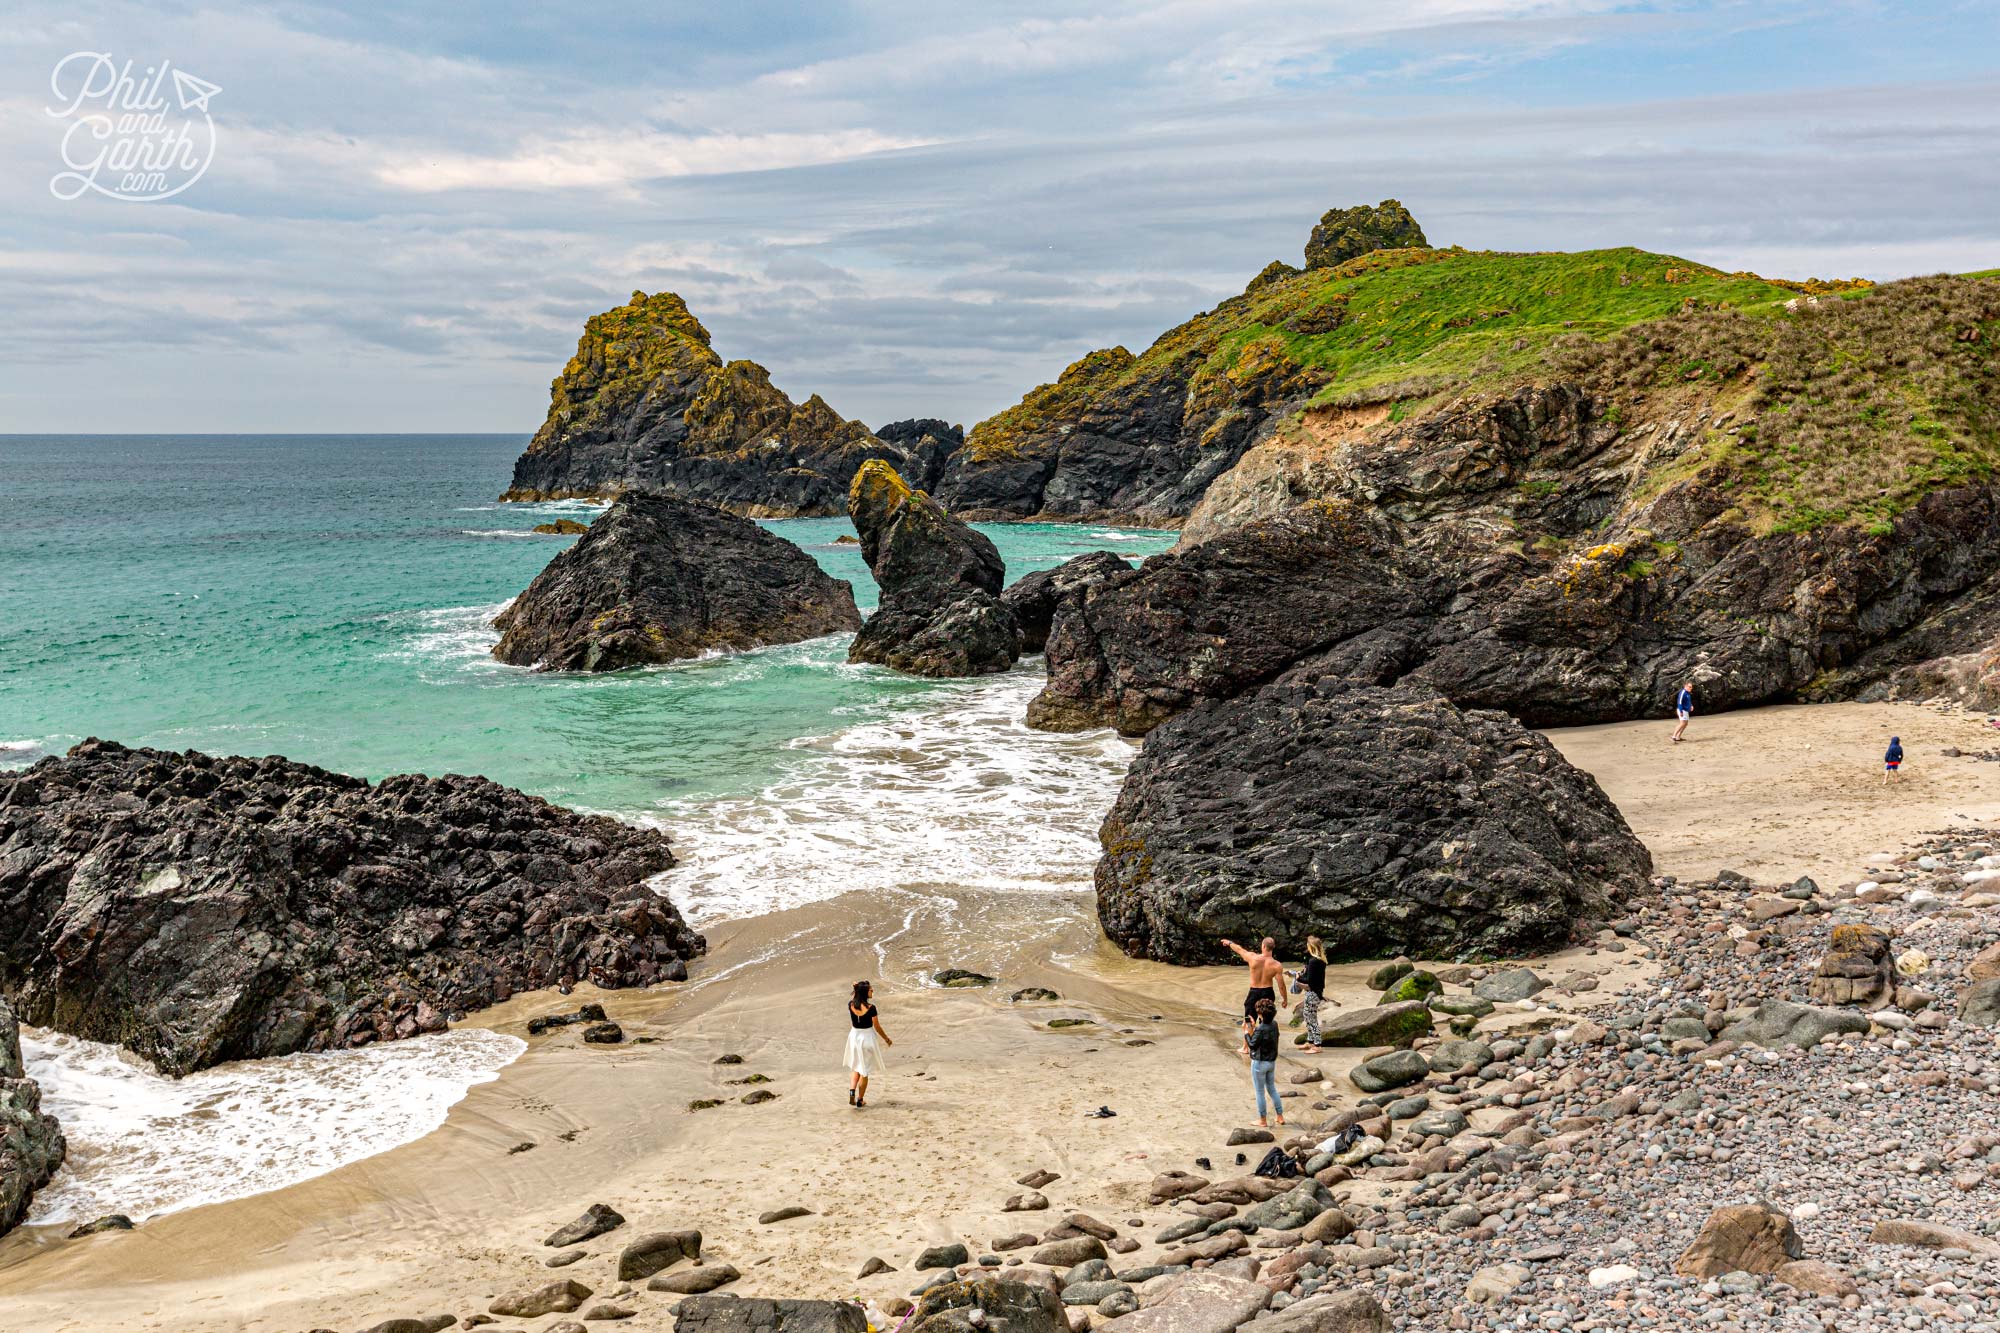 Kynance Cove is just gorgeous – a wild and remote part of Cornwall